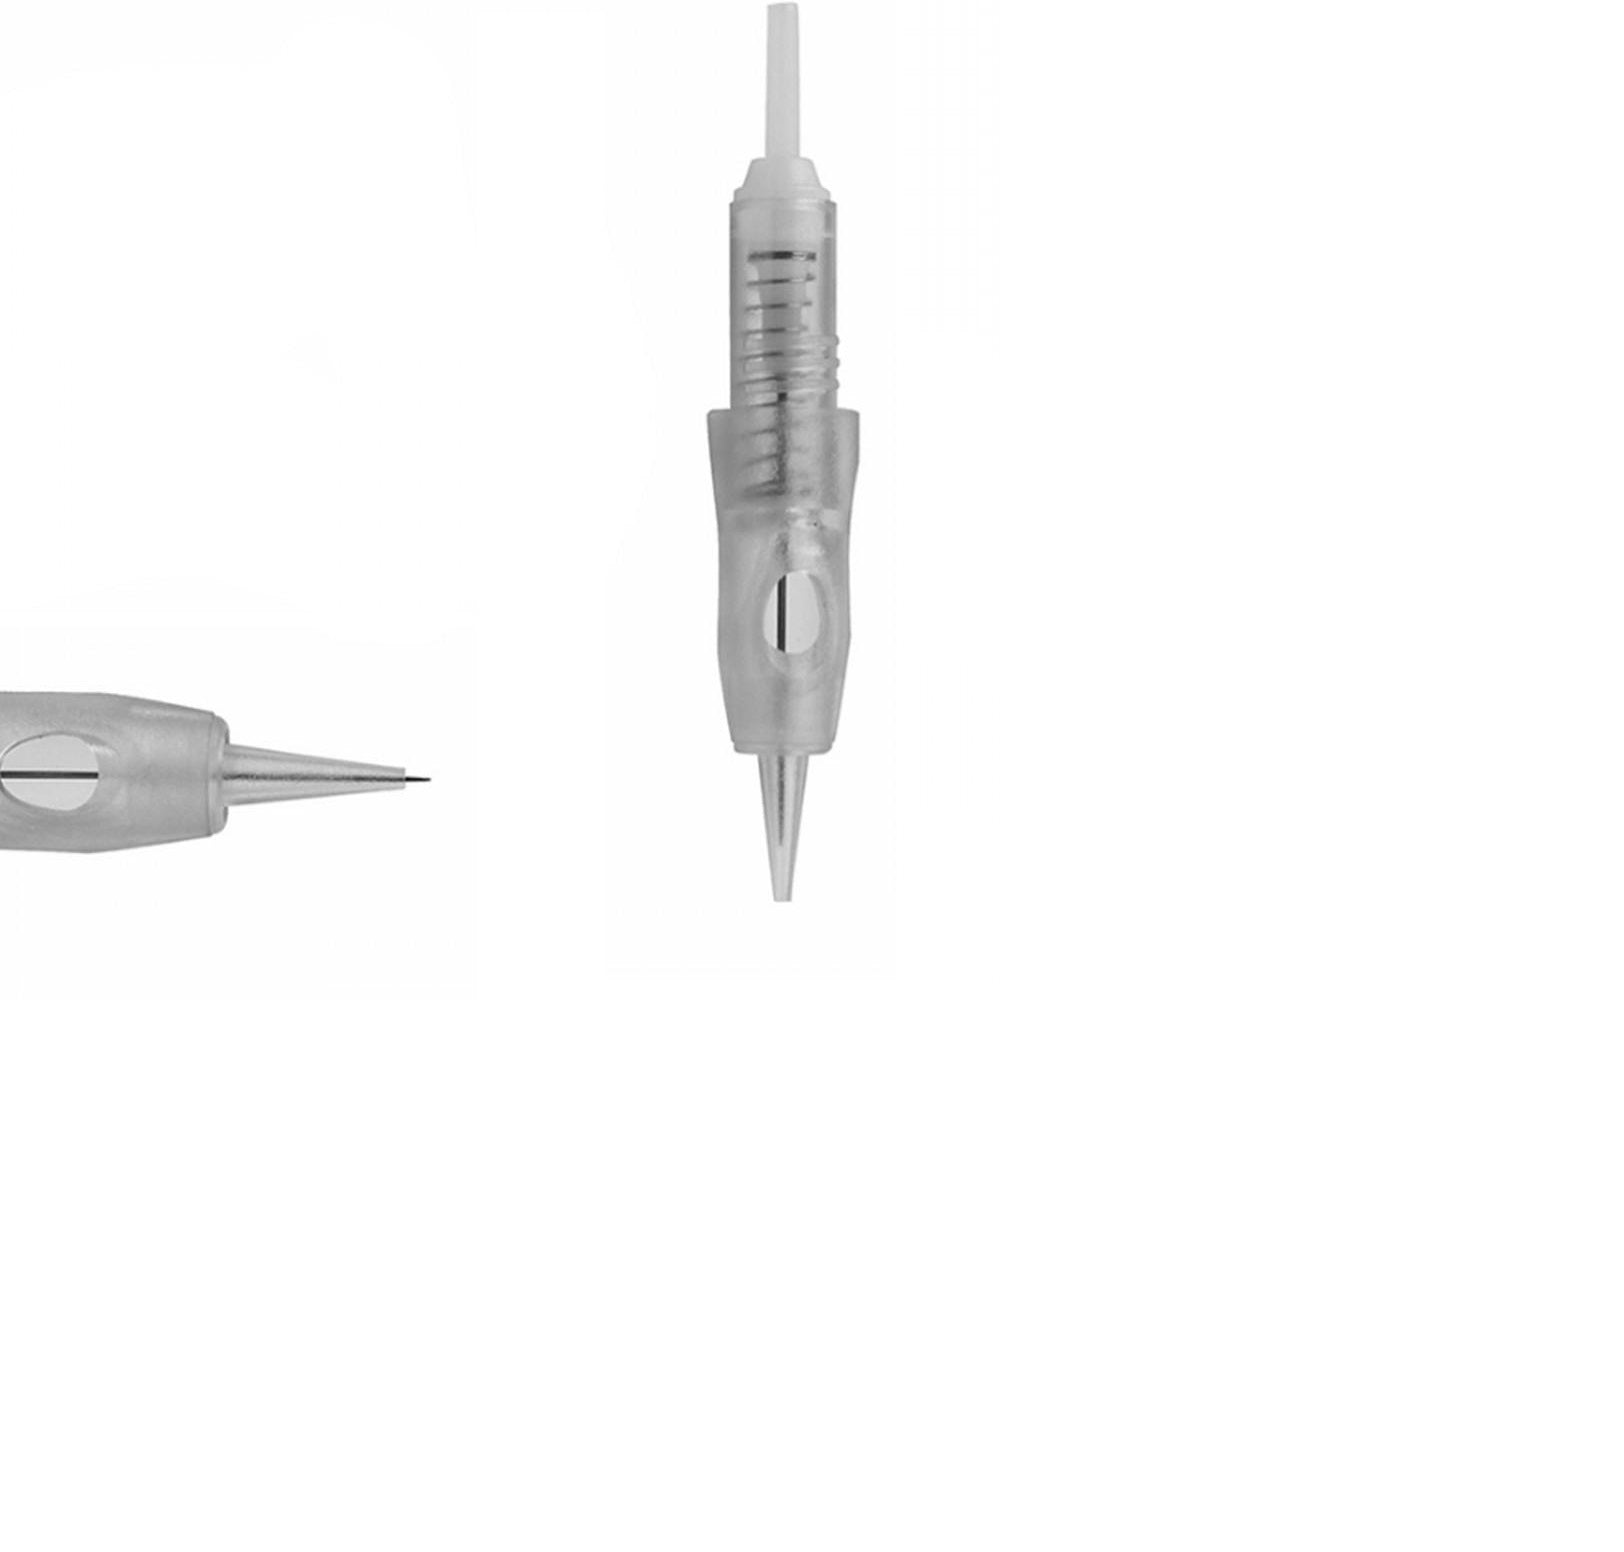 1RL Needle Cartridge with membrane, permanent makeup pen needle cartridge front clear view with needle